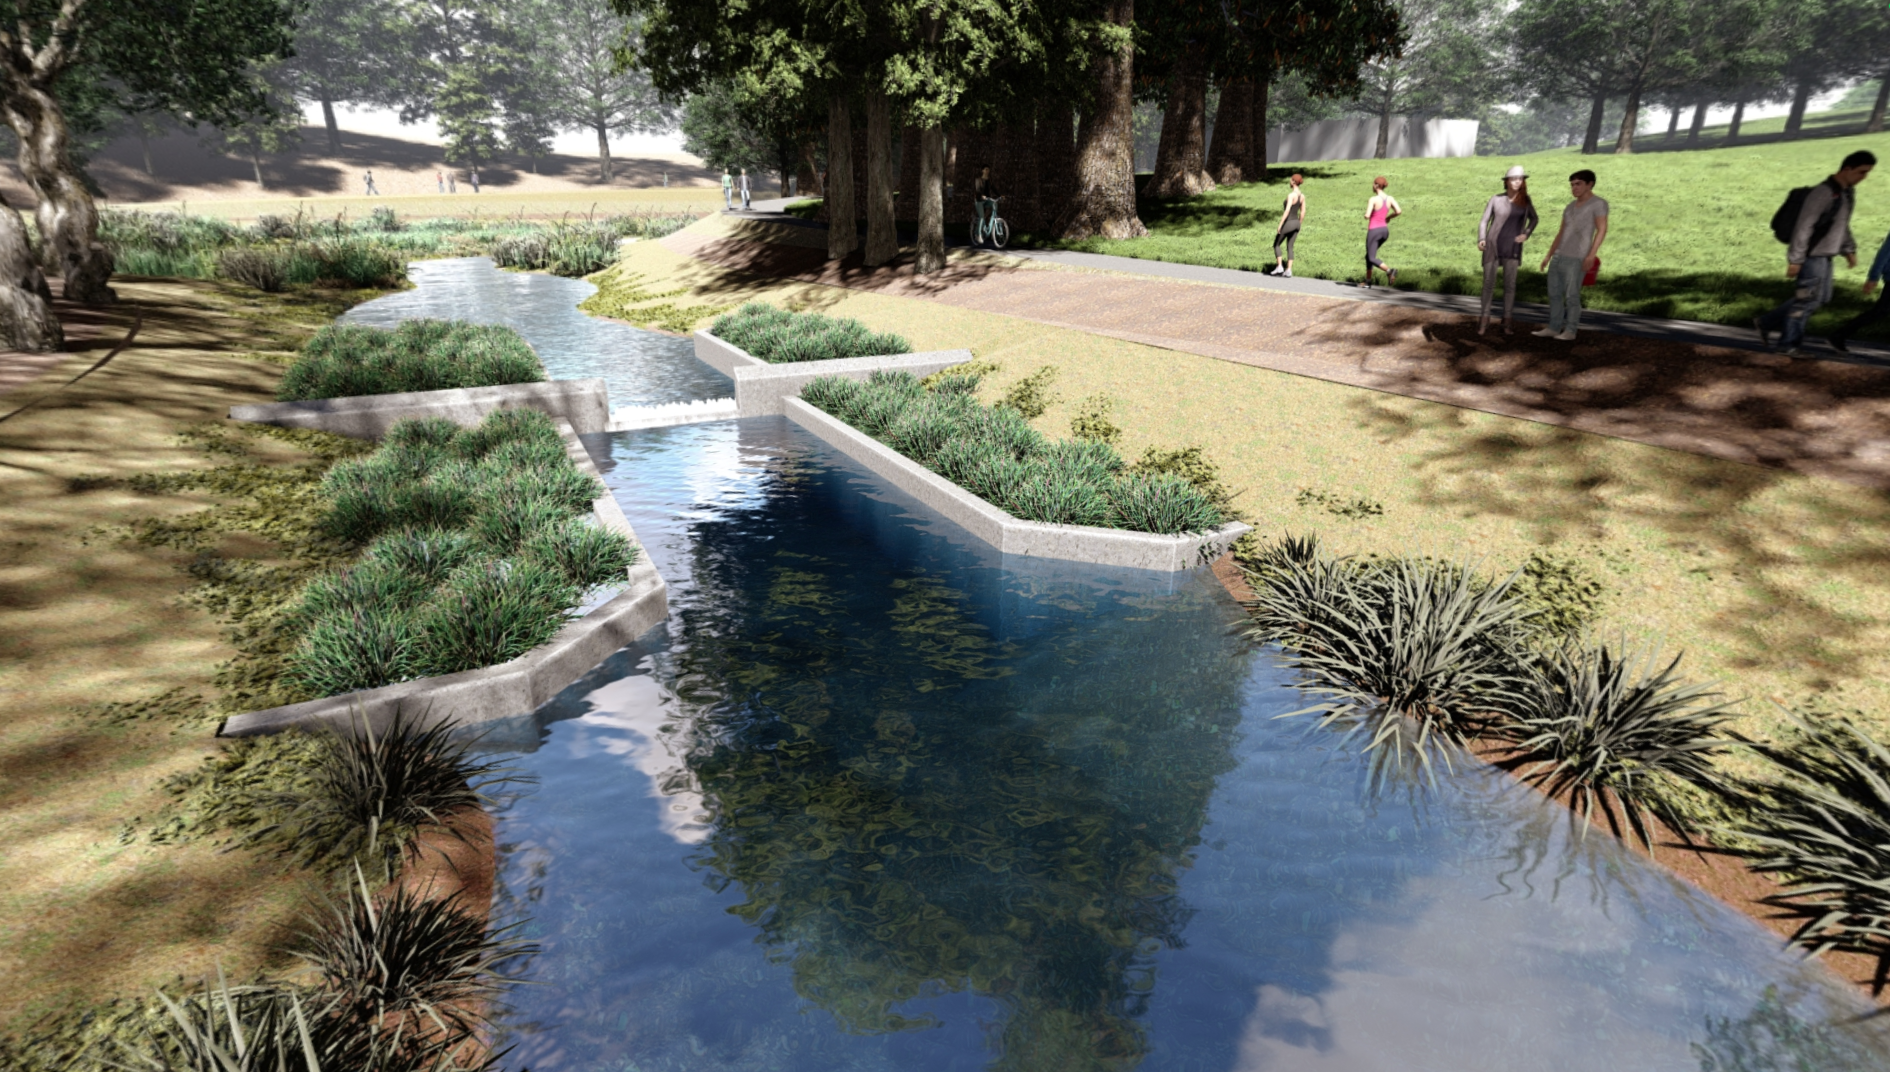 Image of a photorealistic rendering of a weir in the narrow portion of a waterway with landscaping, people and pathways on either side.